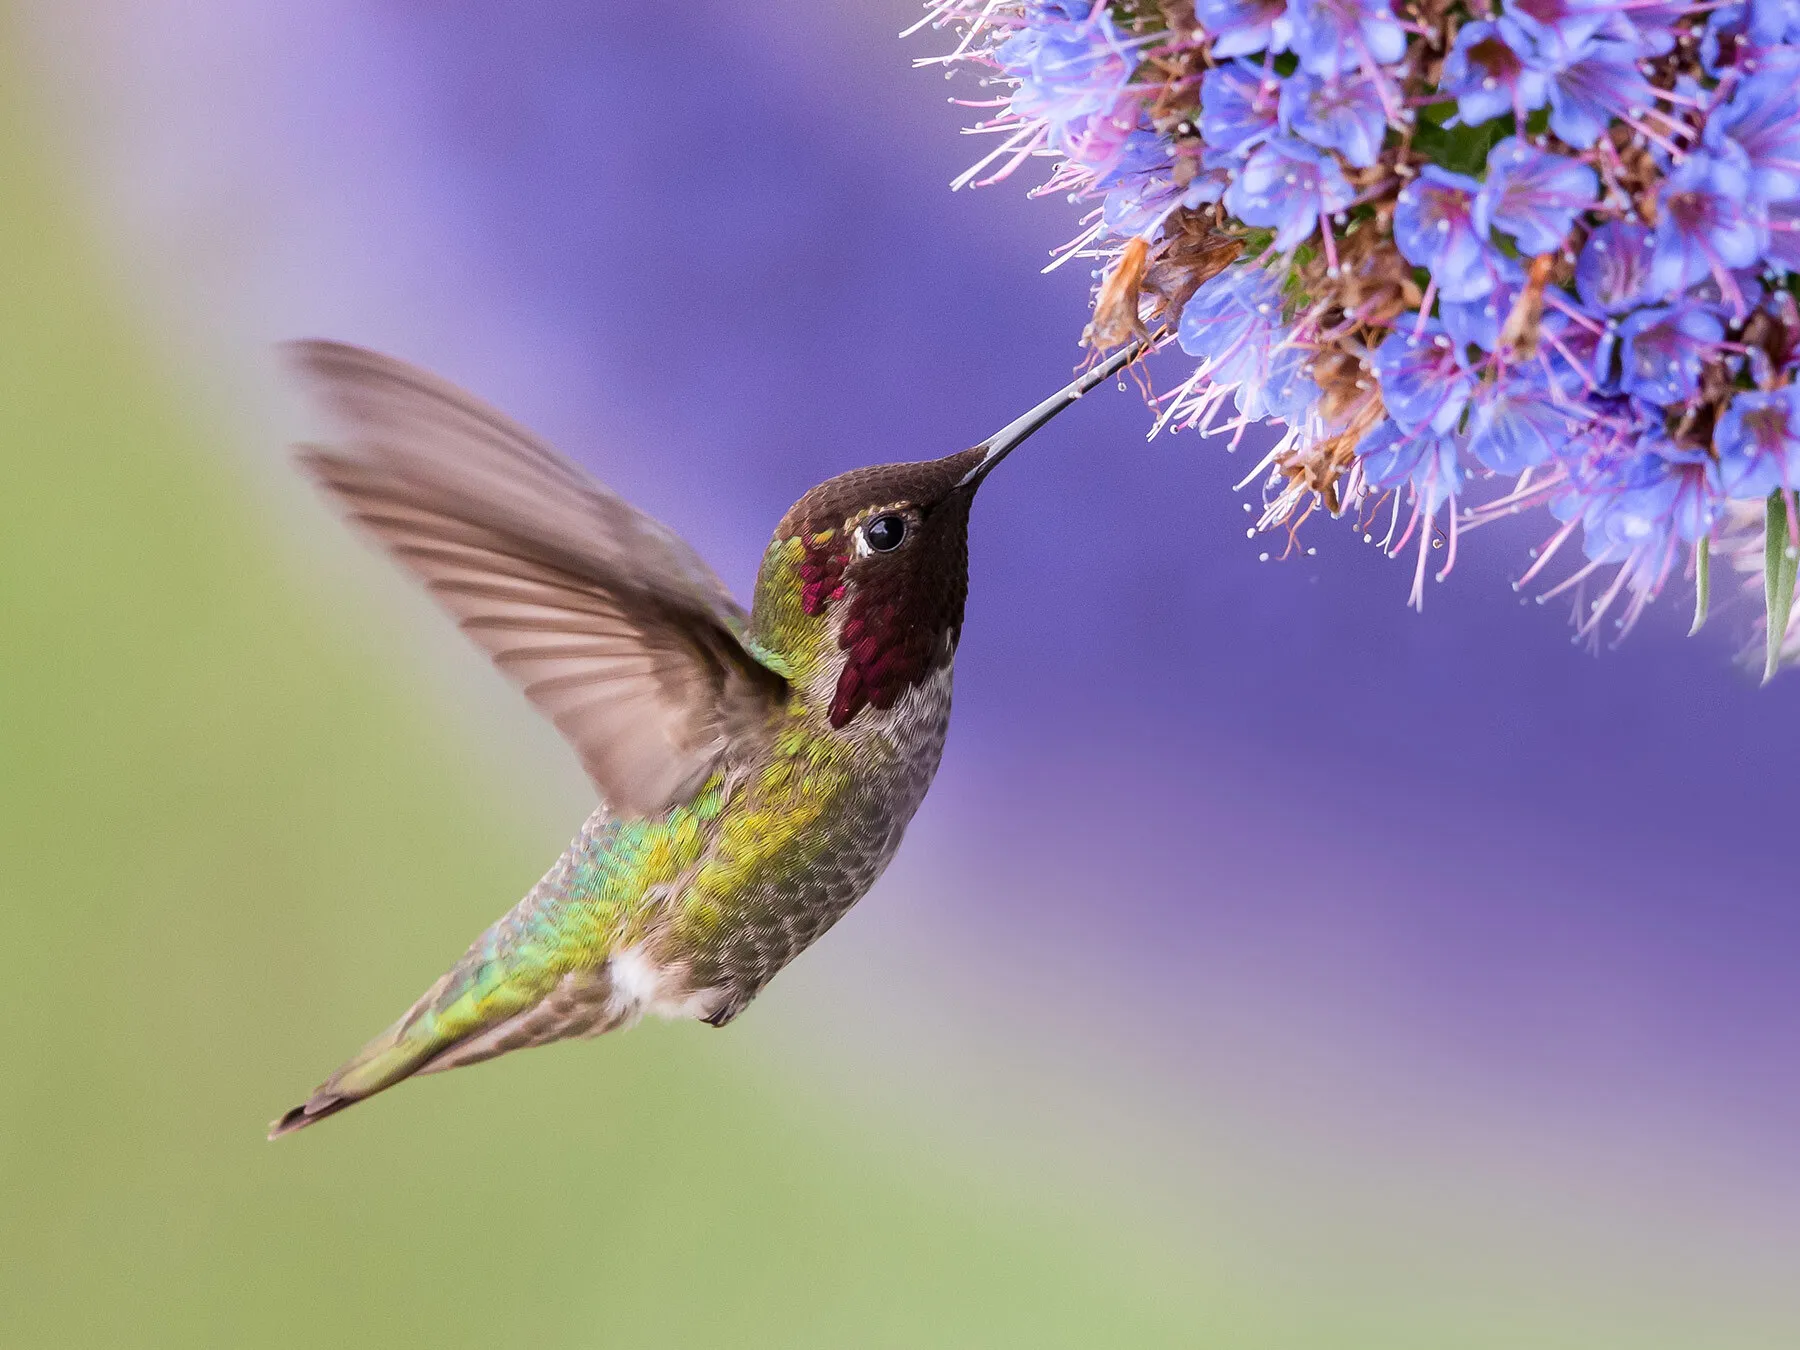 What Do Hummingbirds Eat? (Complete Guide)